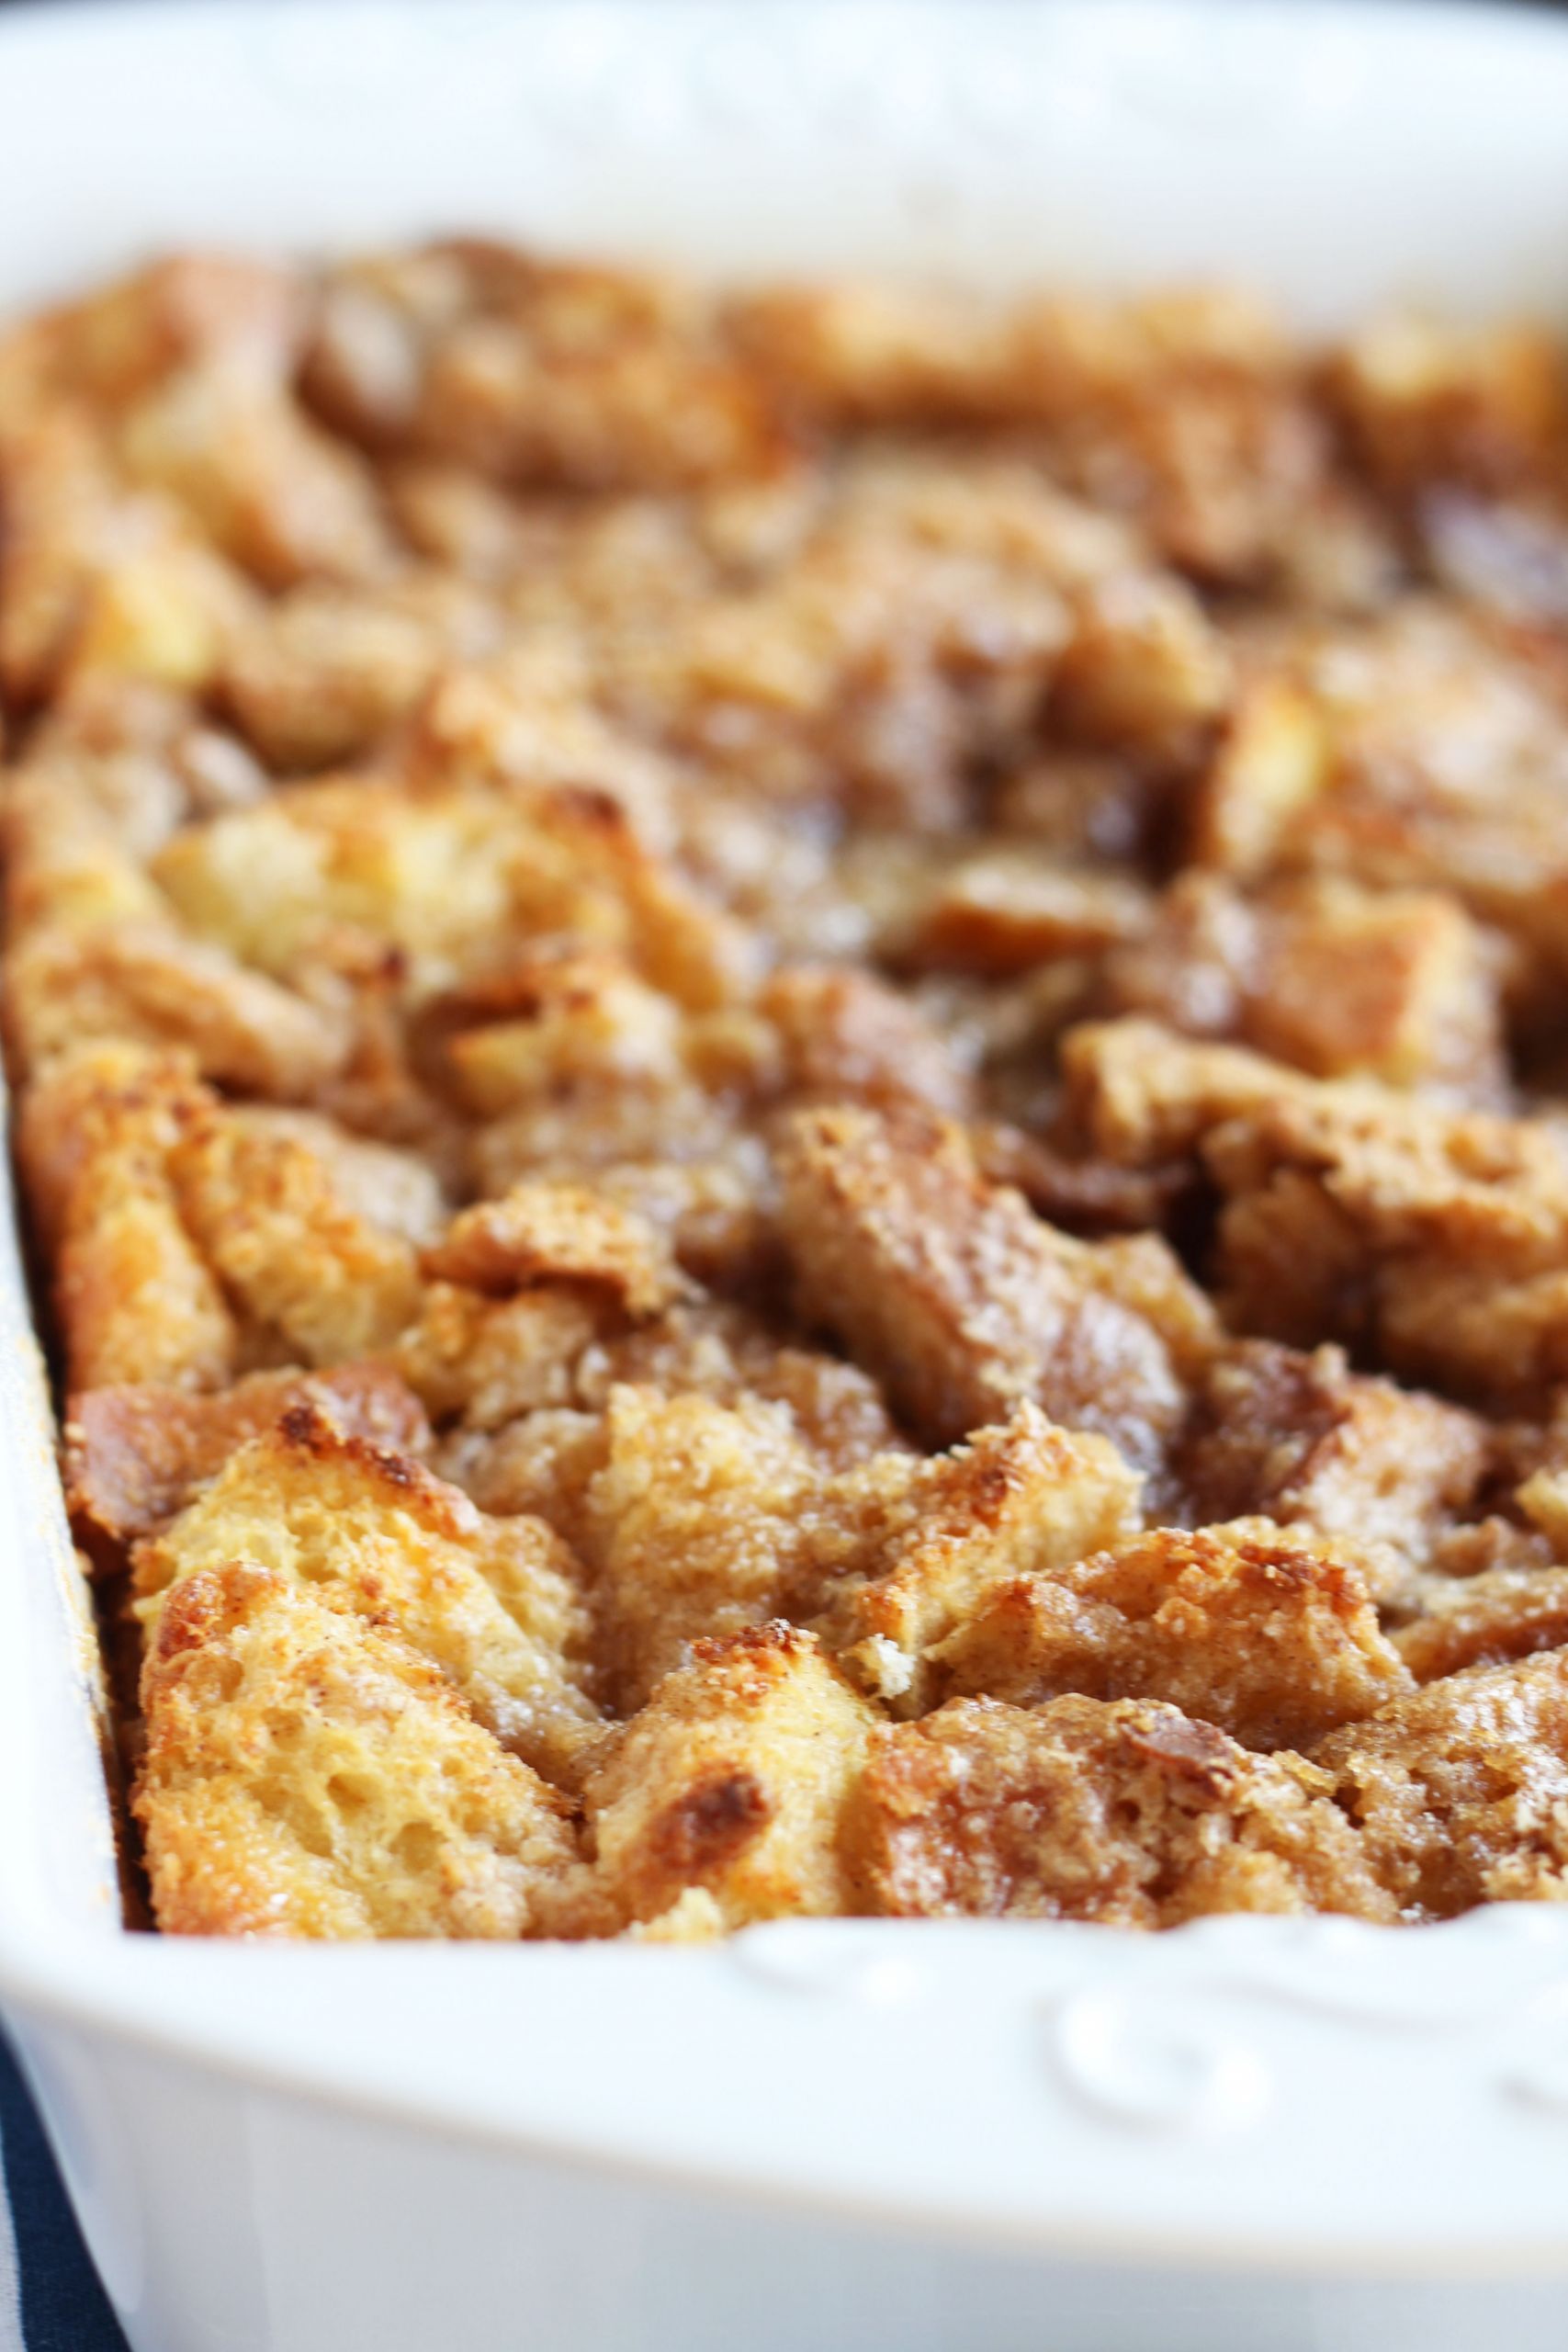 French Bread French toast Bake New Easy Baked French toast Casserole